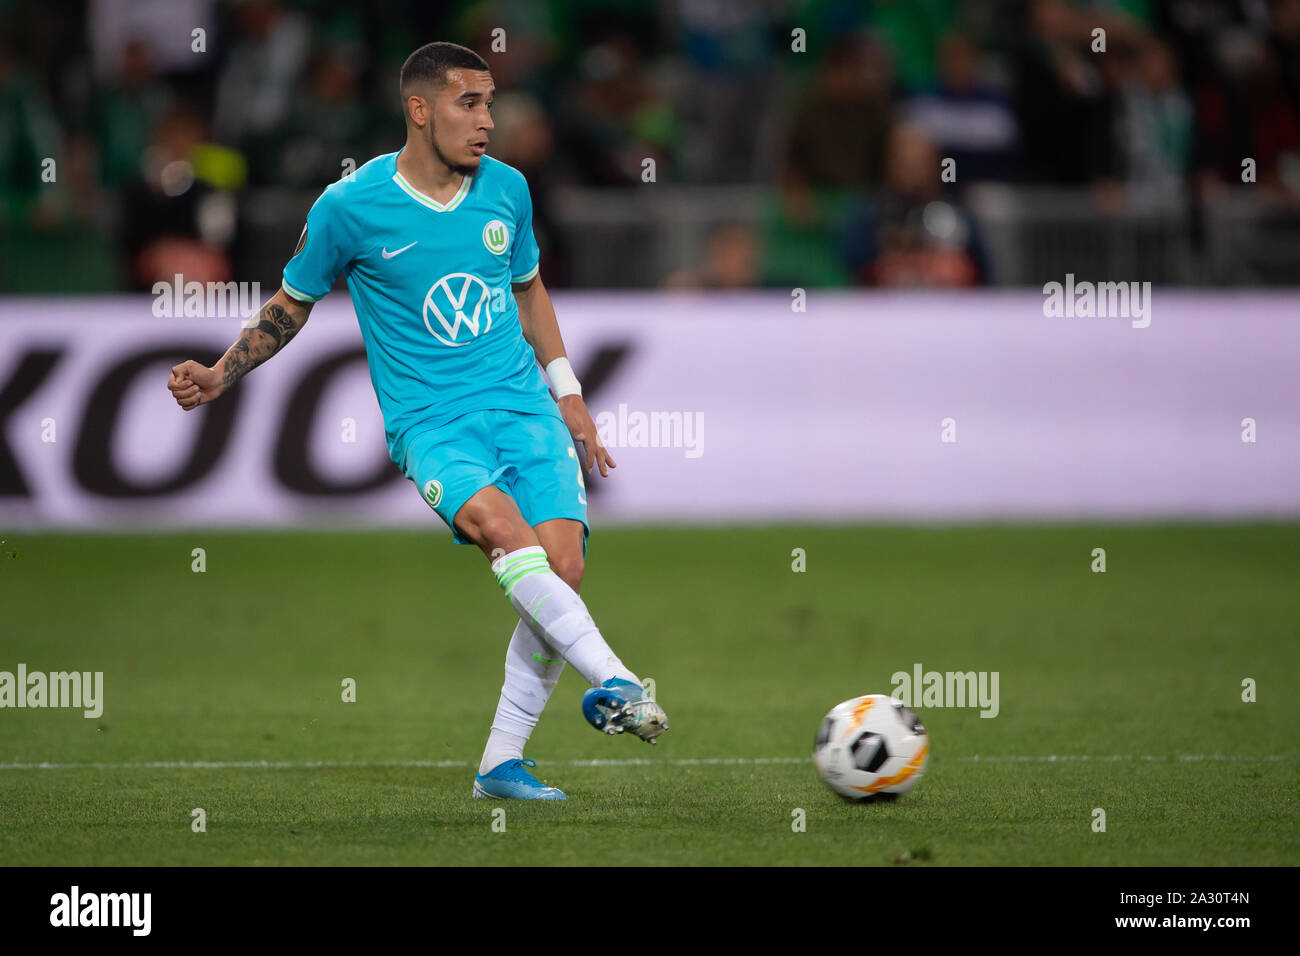 03 October 2019, France (France), Saint-Étienne: Soccer: Europa League, AS St. Étienne - VfL Wolfsburg, Group stage, Group I, 2nd matchday at Stade Geoffroy-Guichard. Wolfsburg's William controls the ball. Photo: Swen Pförtner/dpa Stock Photo